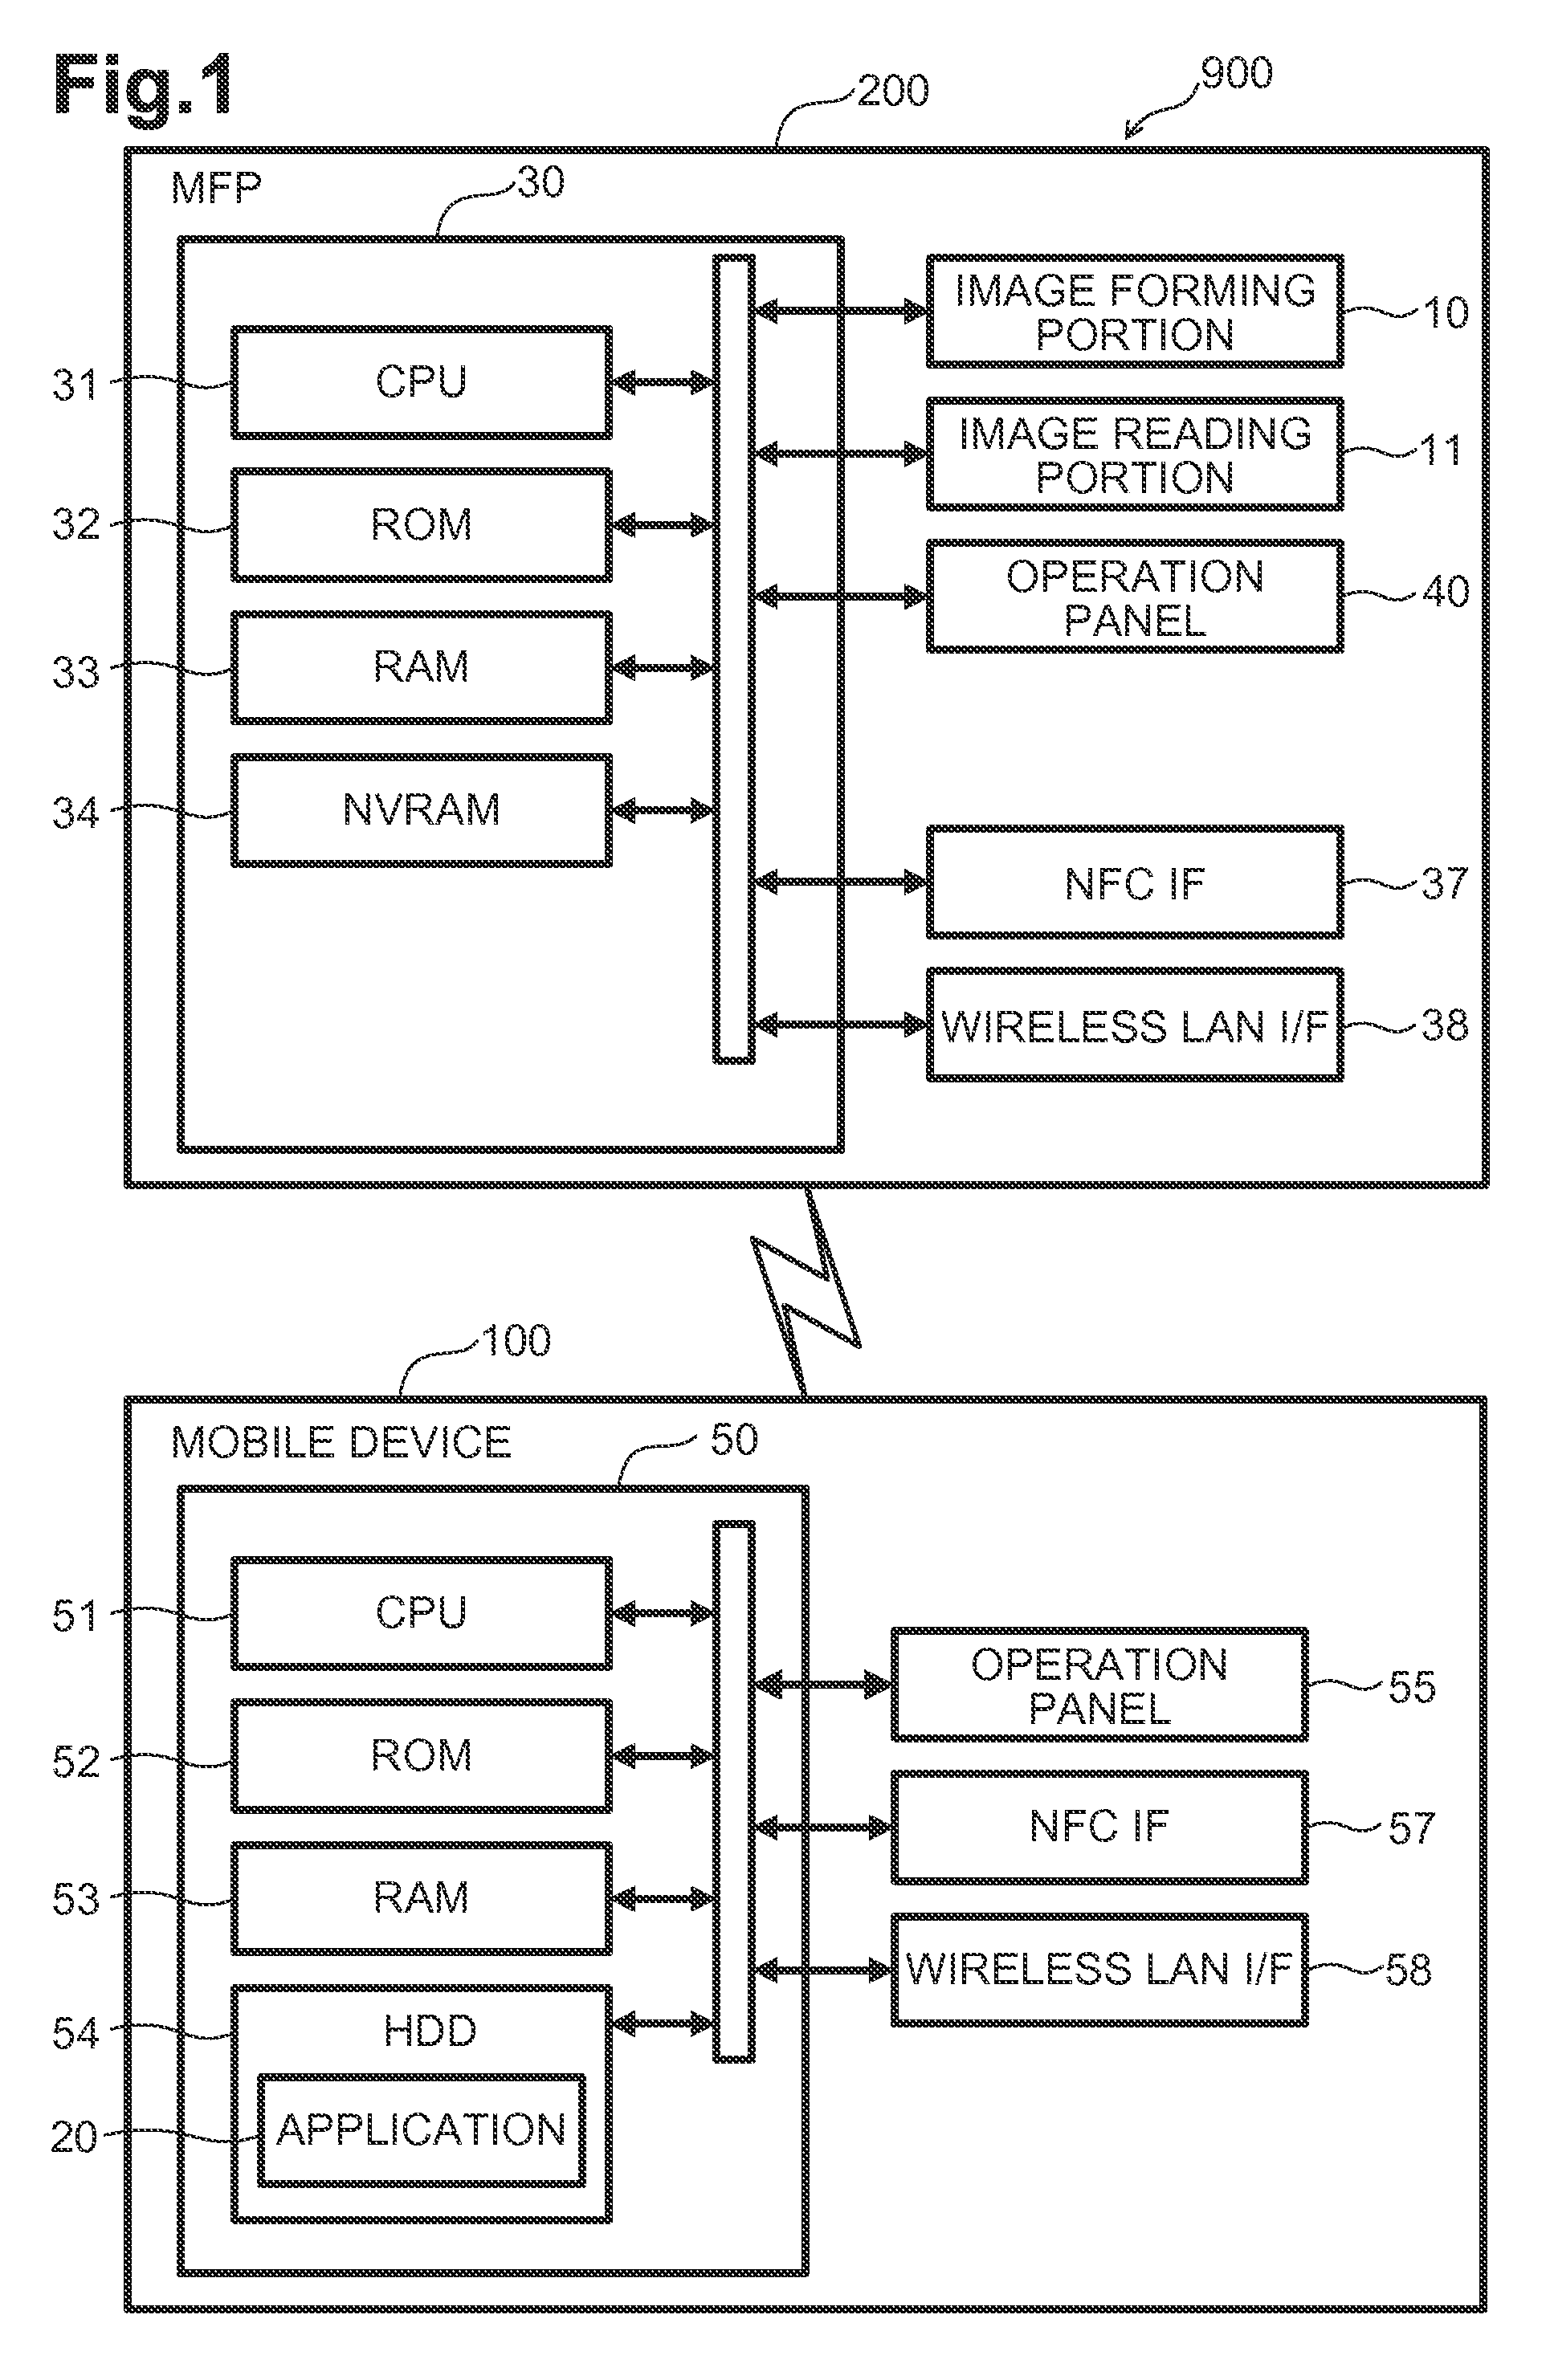 Image processing systems that establish connections using different communication protocols, data processing apparatuses that establish connections using different communication protocols, and computer-readable media storing instructions for such data processing apparatuses